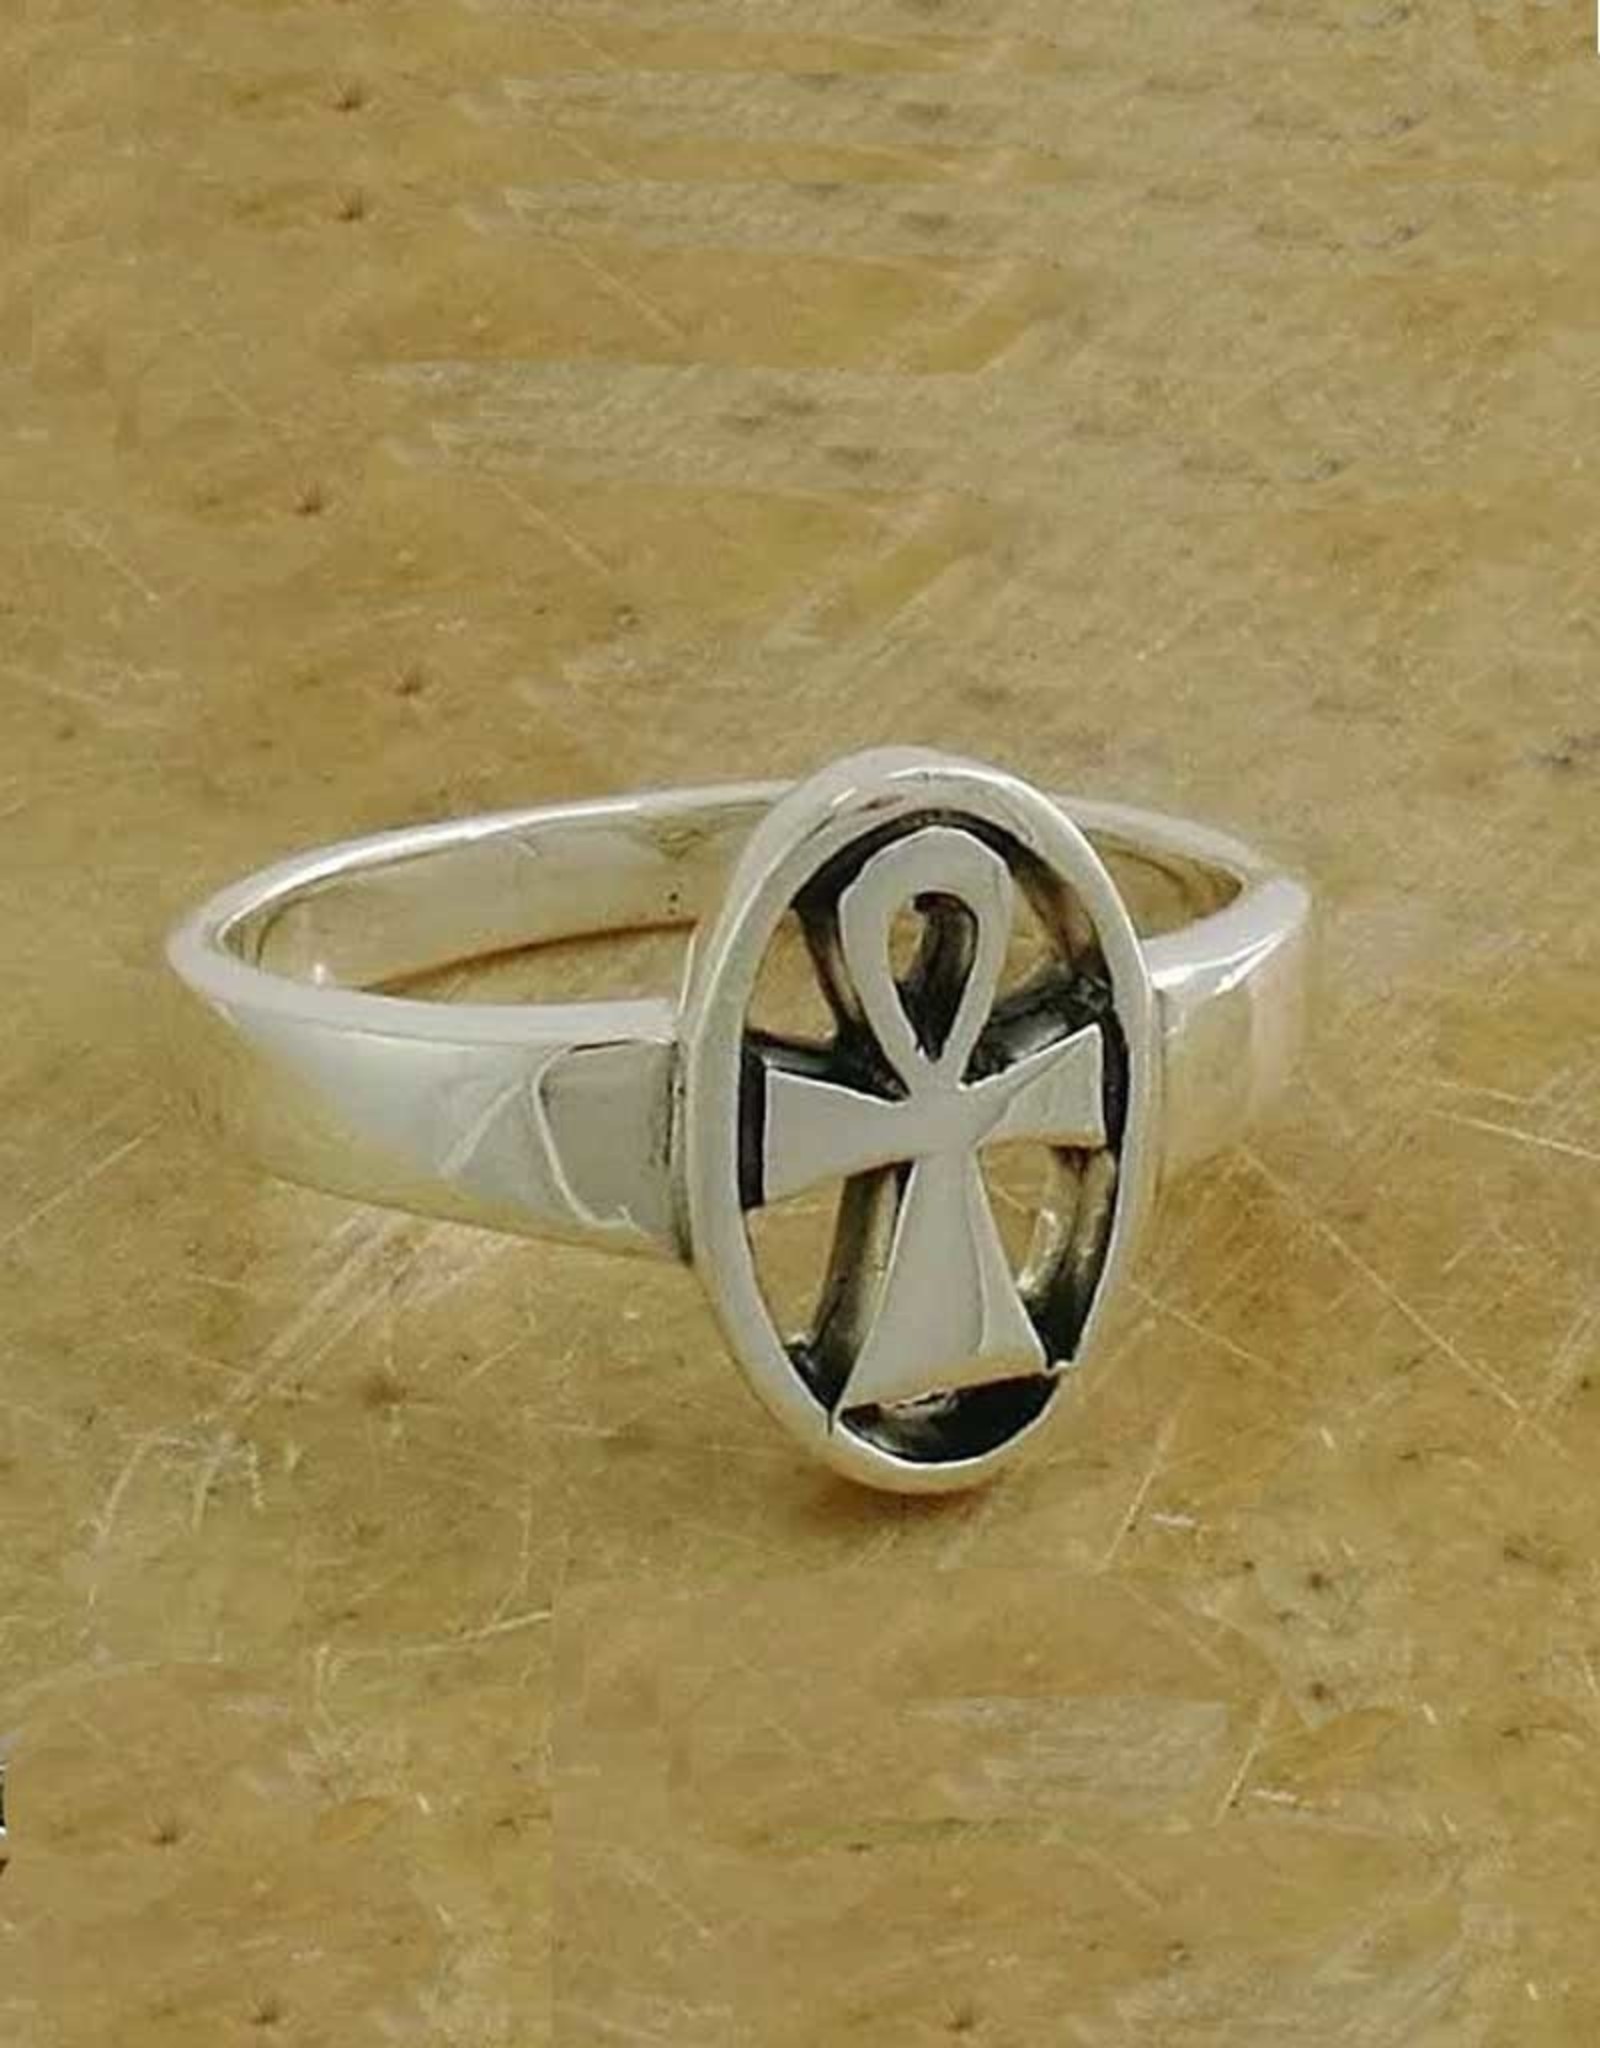 Ankh Ring - Size 8 Sterling Silver